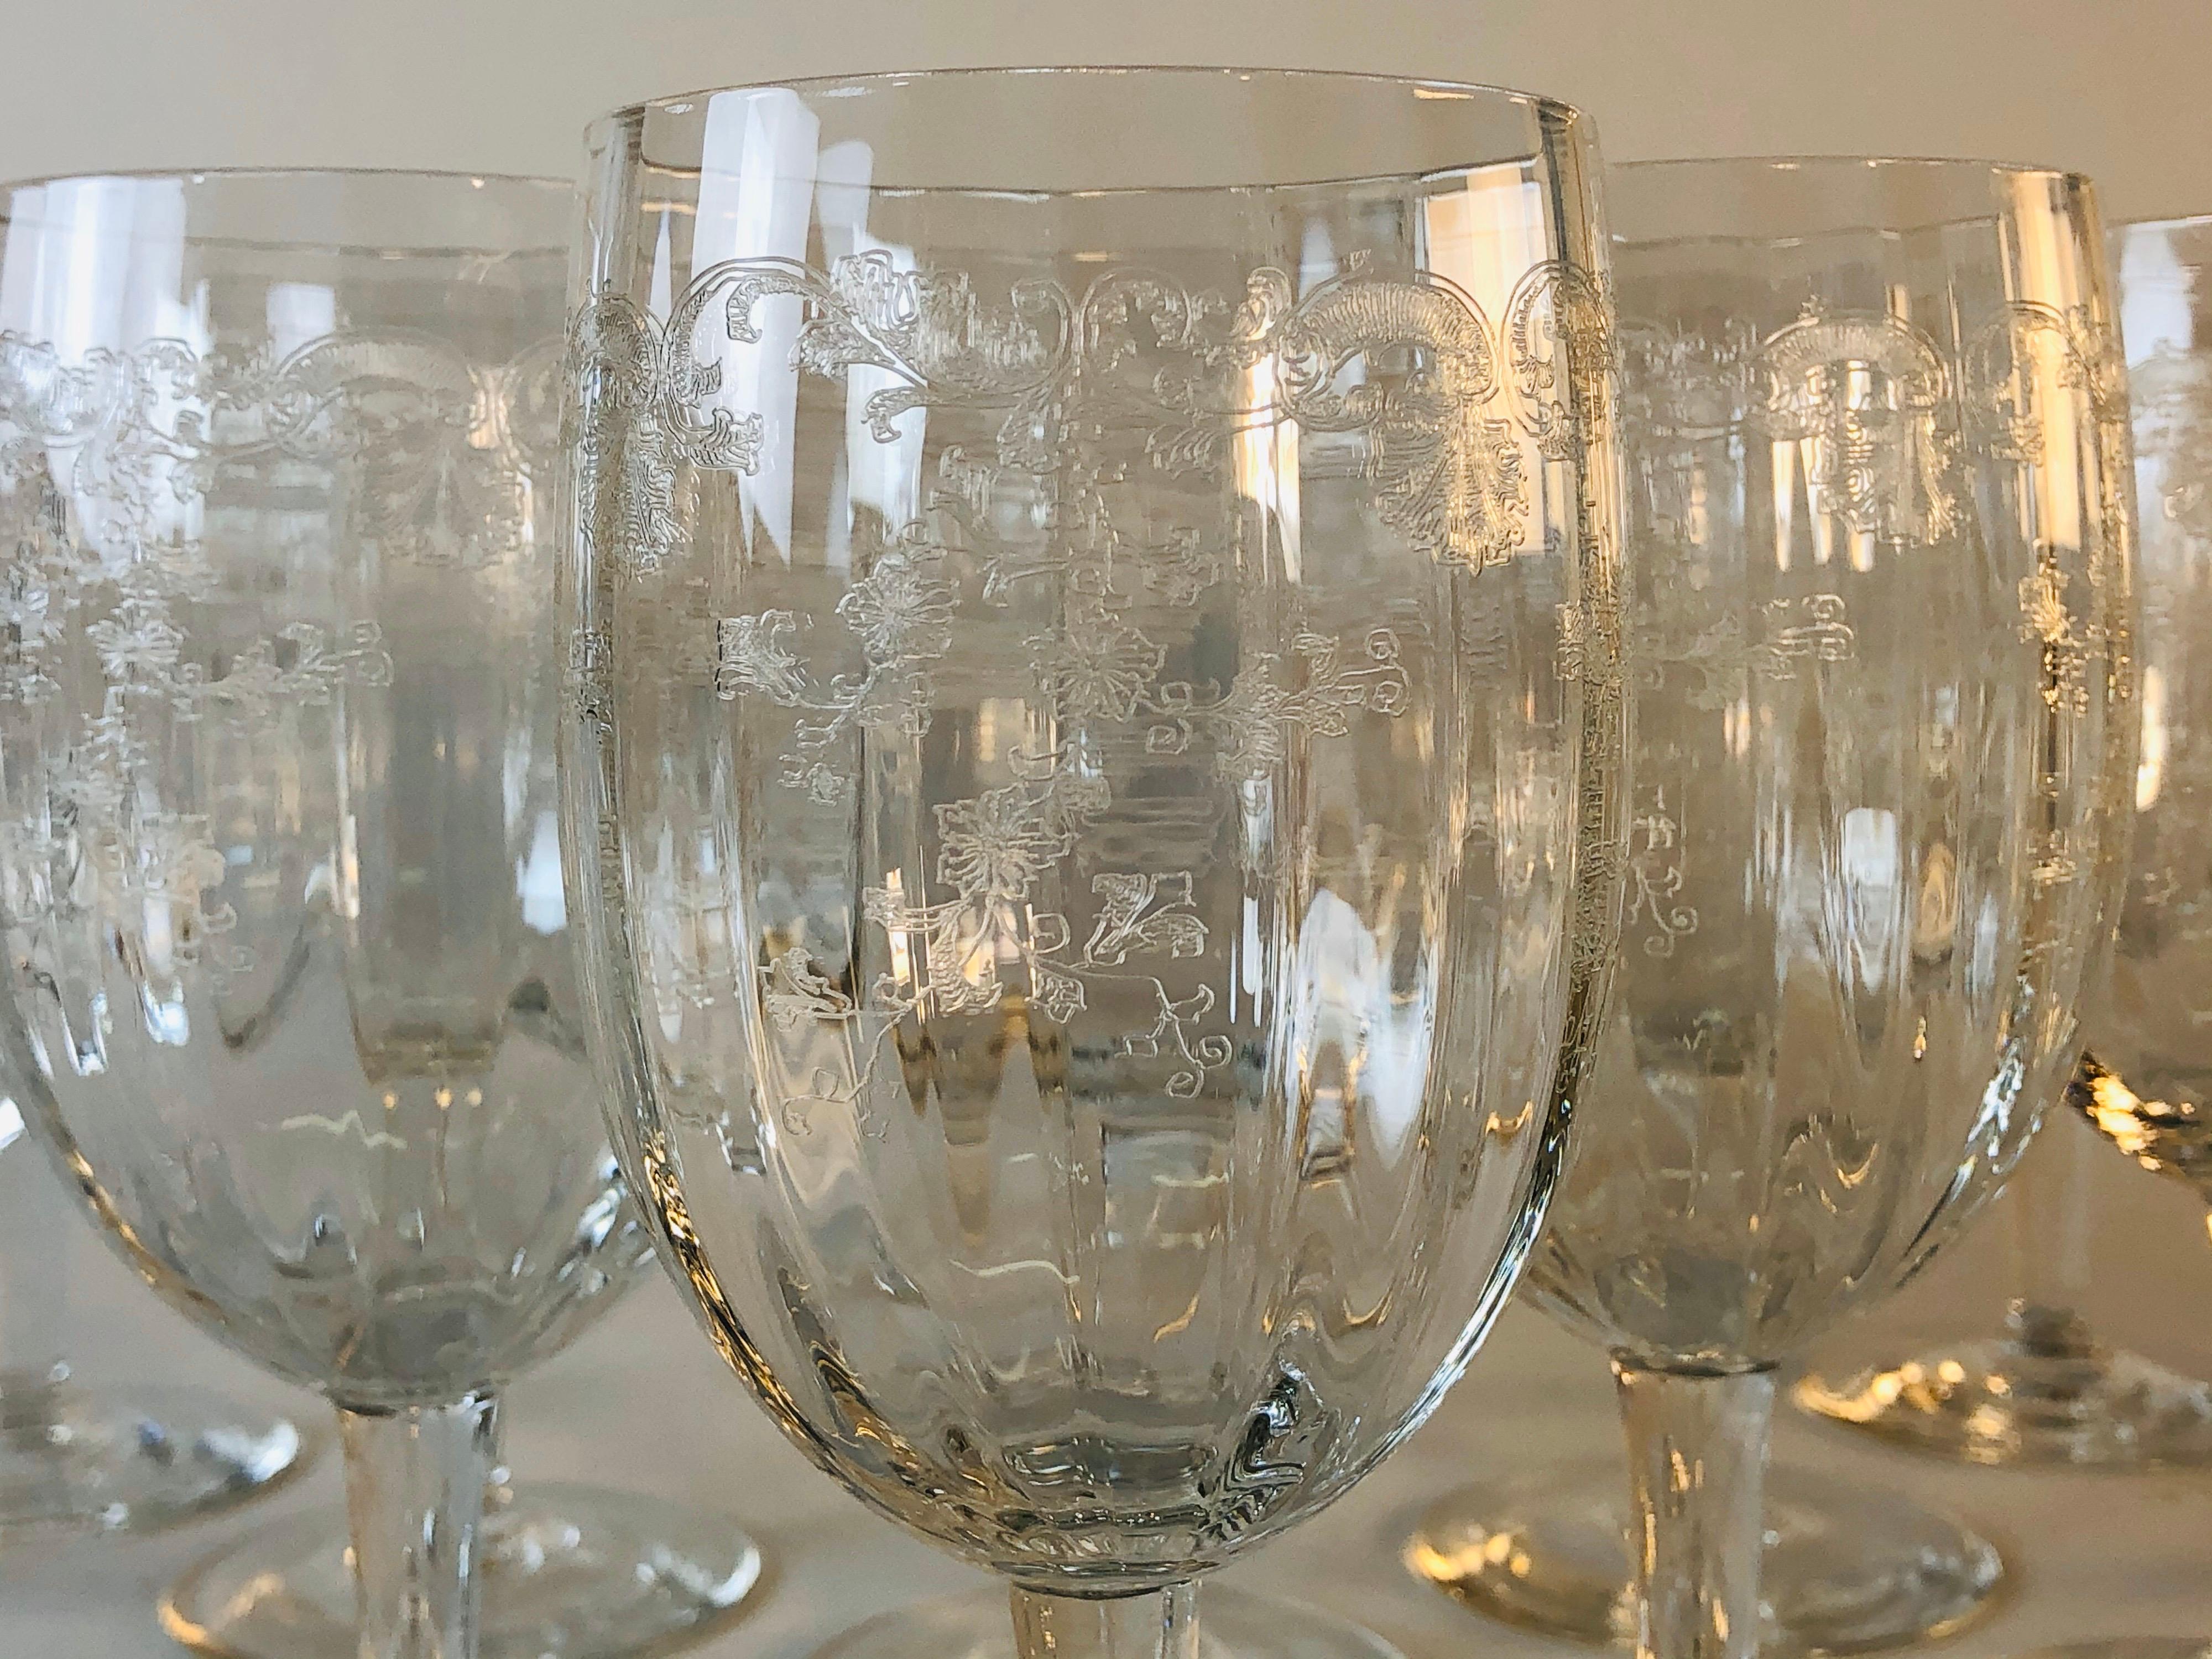 Vintage 1950s set of 12 floral etched wine stems. The etching covers the entire stem. No marks. Excellent condition.